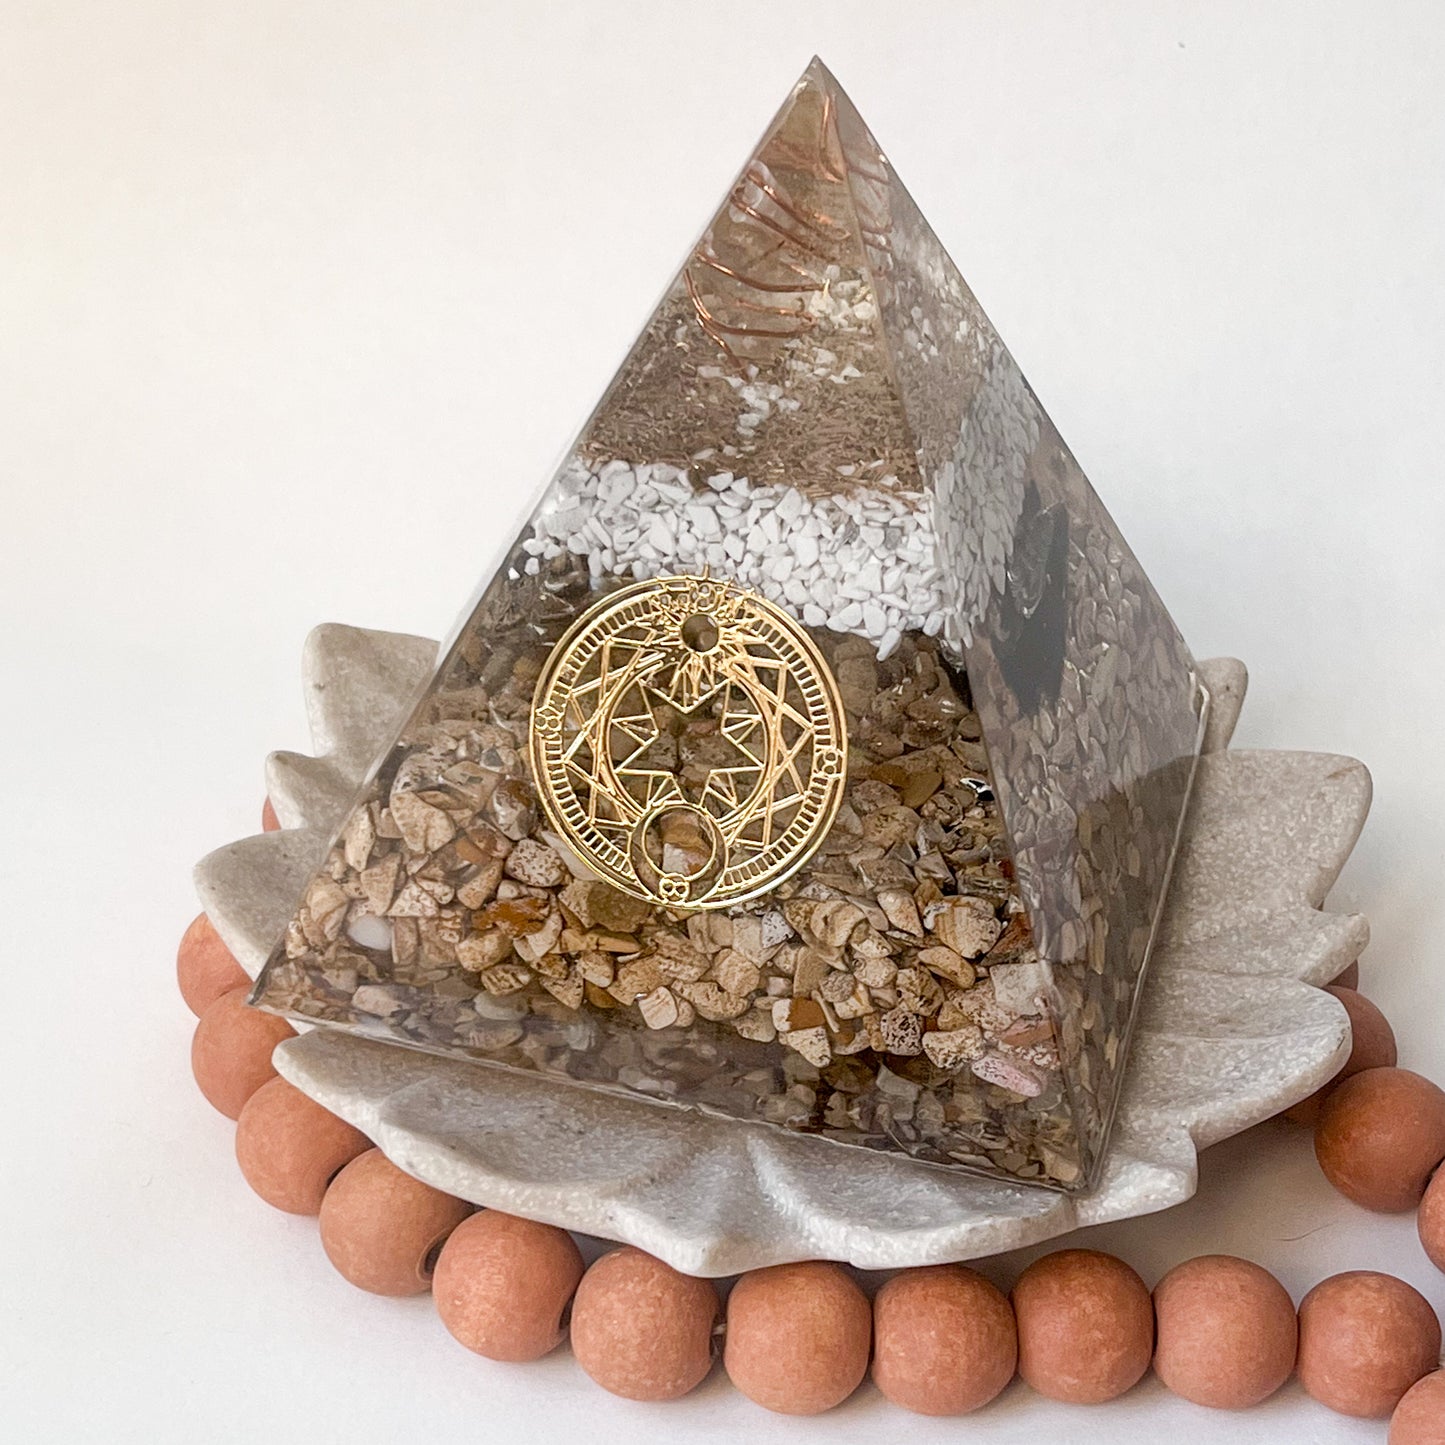 Handmade orgonite pyramid with natural crystals for positive energy and EMF protection